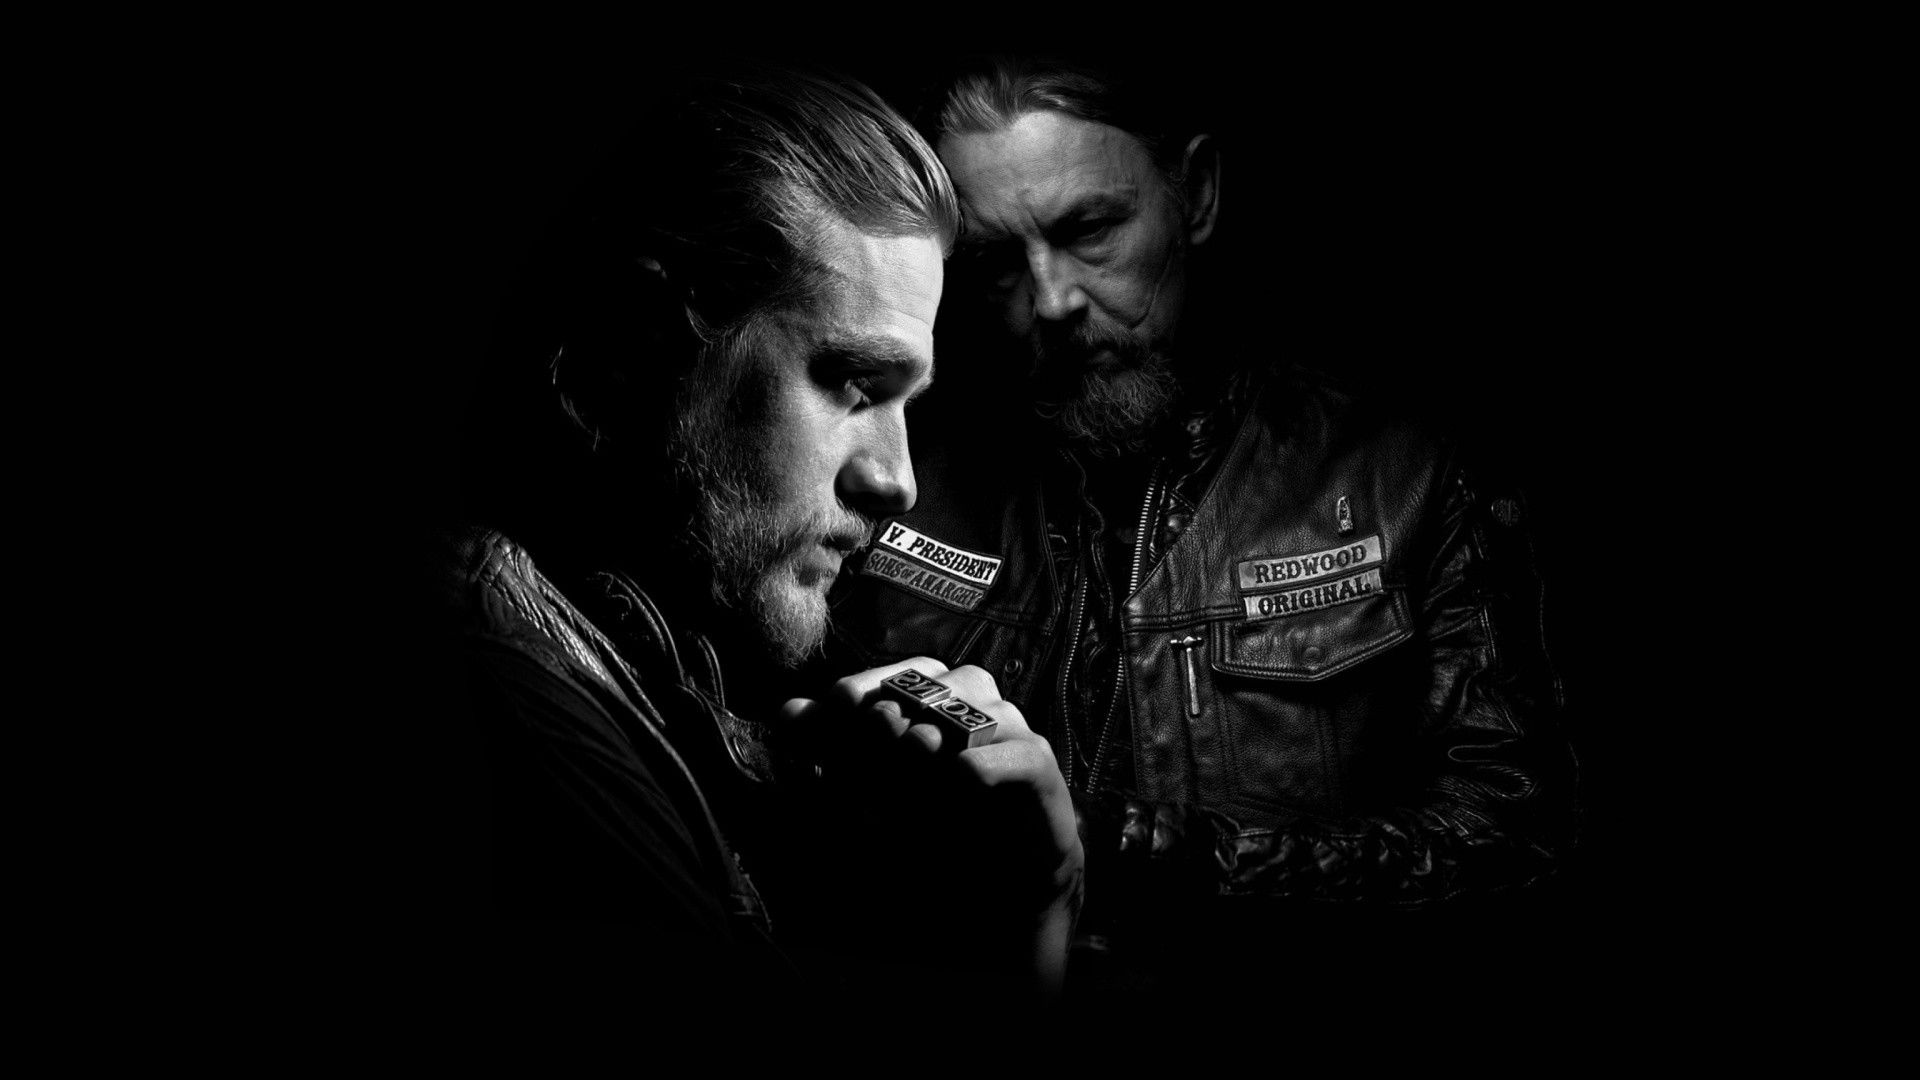 Sons of Anarchy Wallpapers.